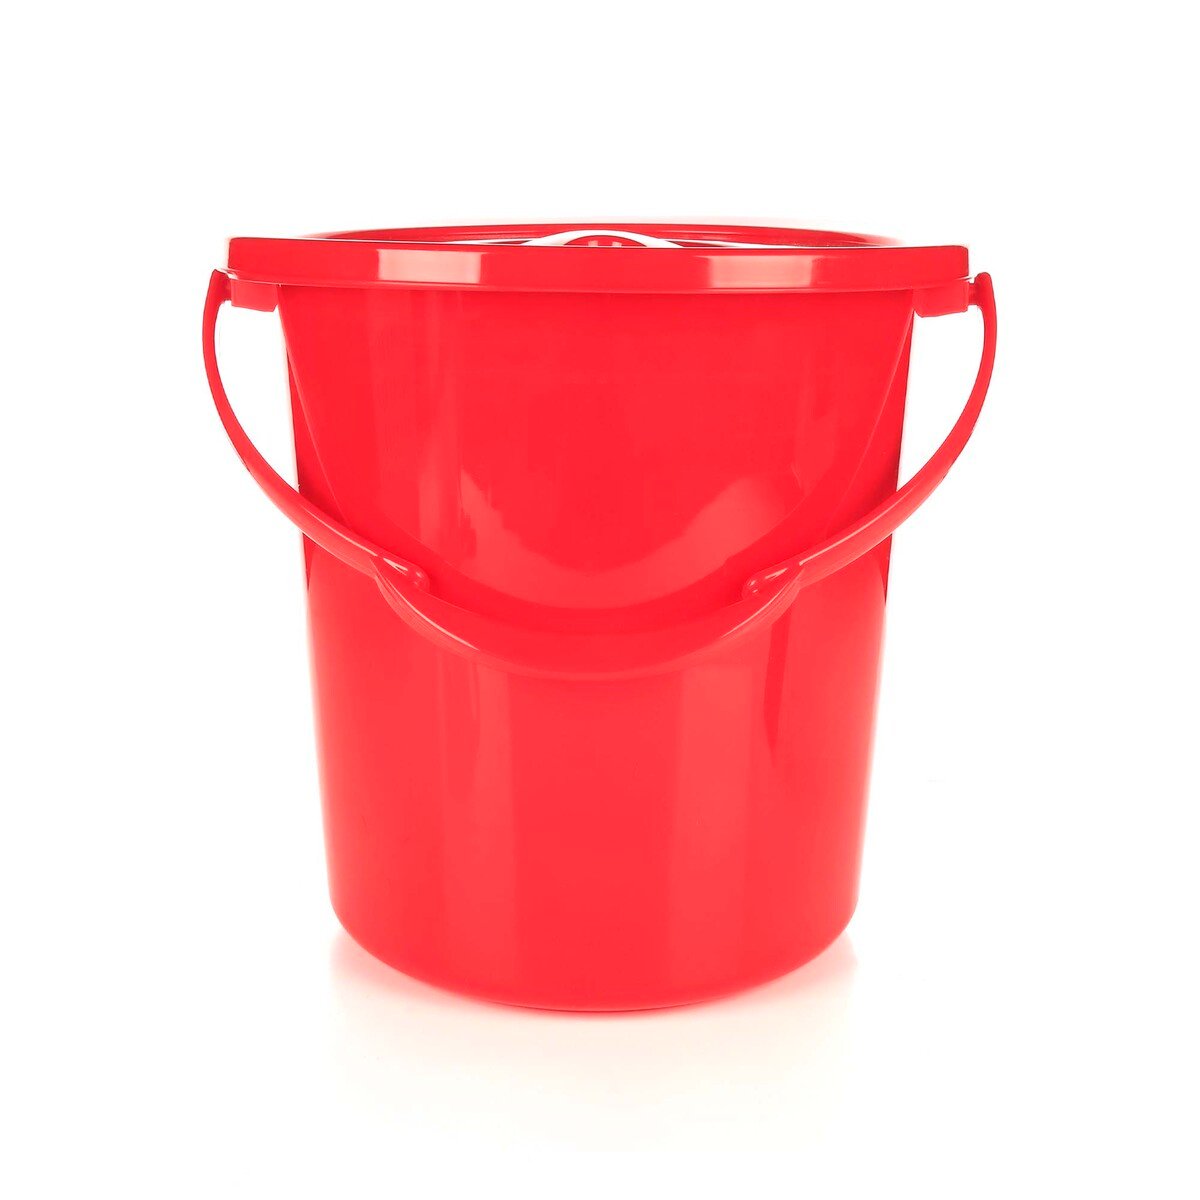 LuLu Bucket With Lid 20Ltr 180520 Assorted Colors